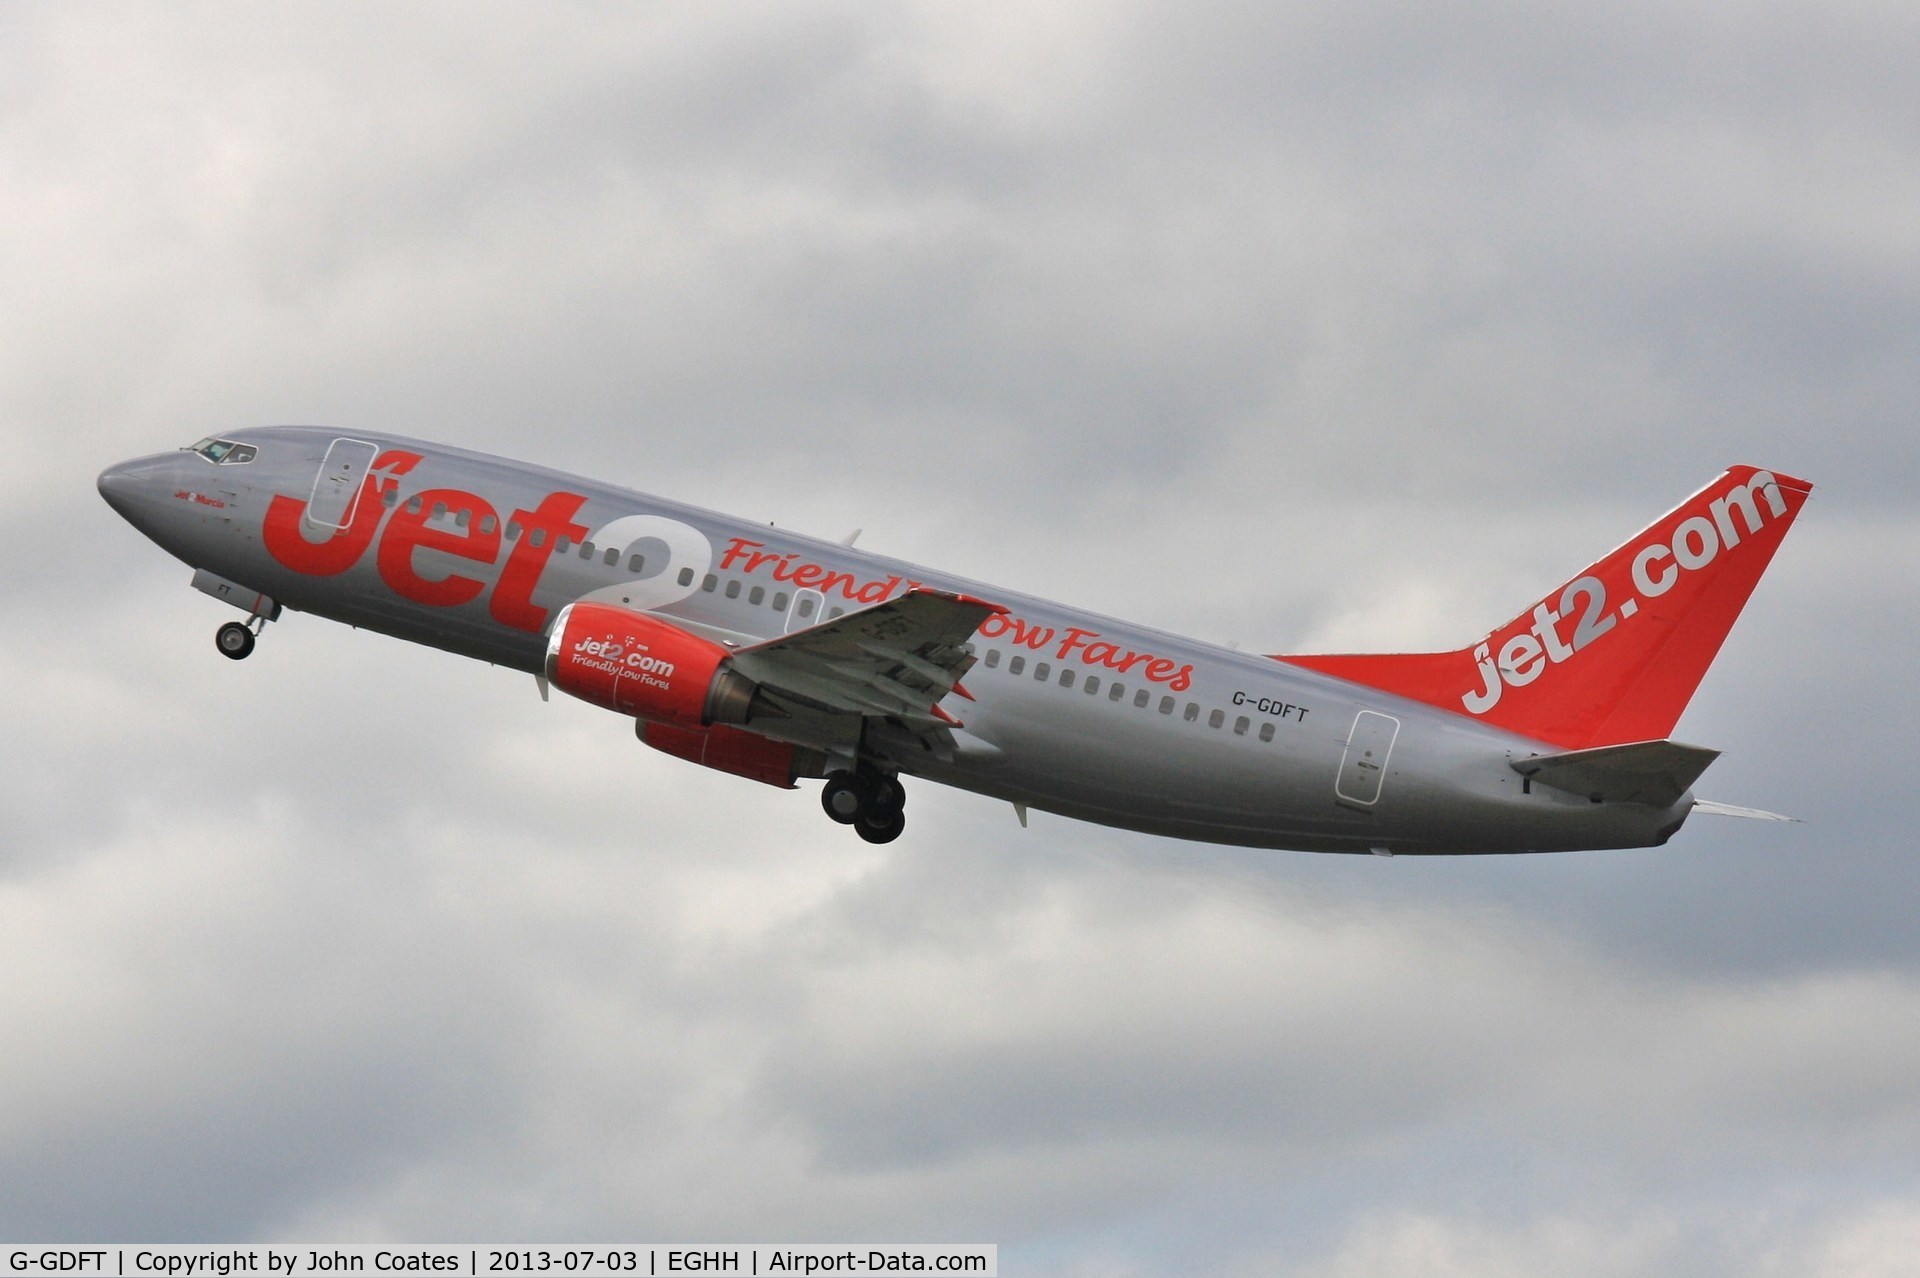 G-GDFT, 1998 Boeing 737-36Q C/N 29141, Departing to Leeds after respray to Jet 2 livery.